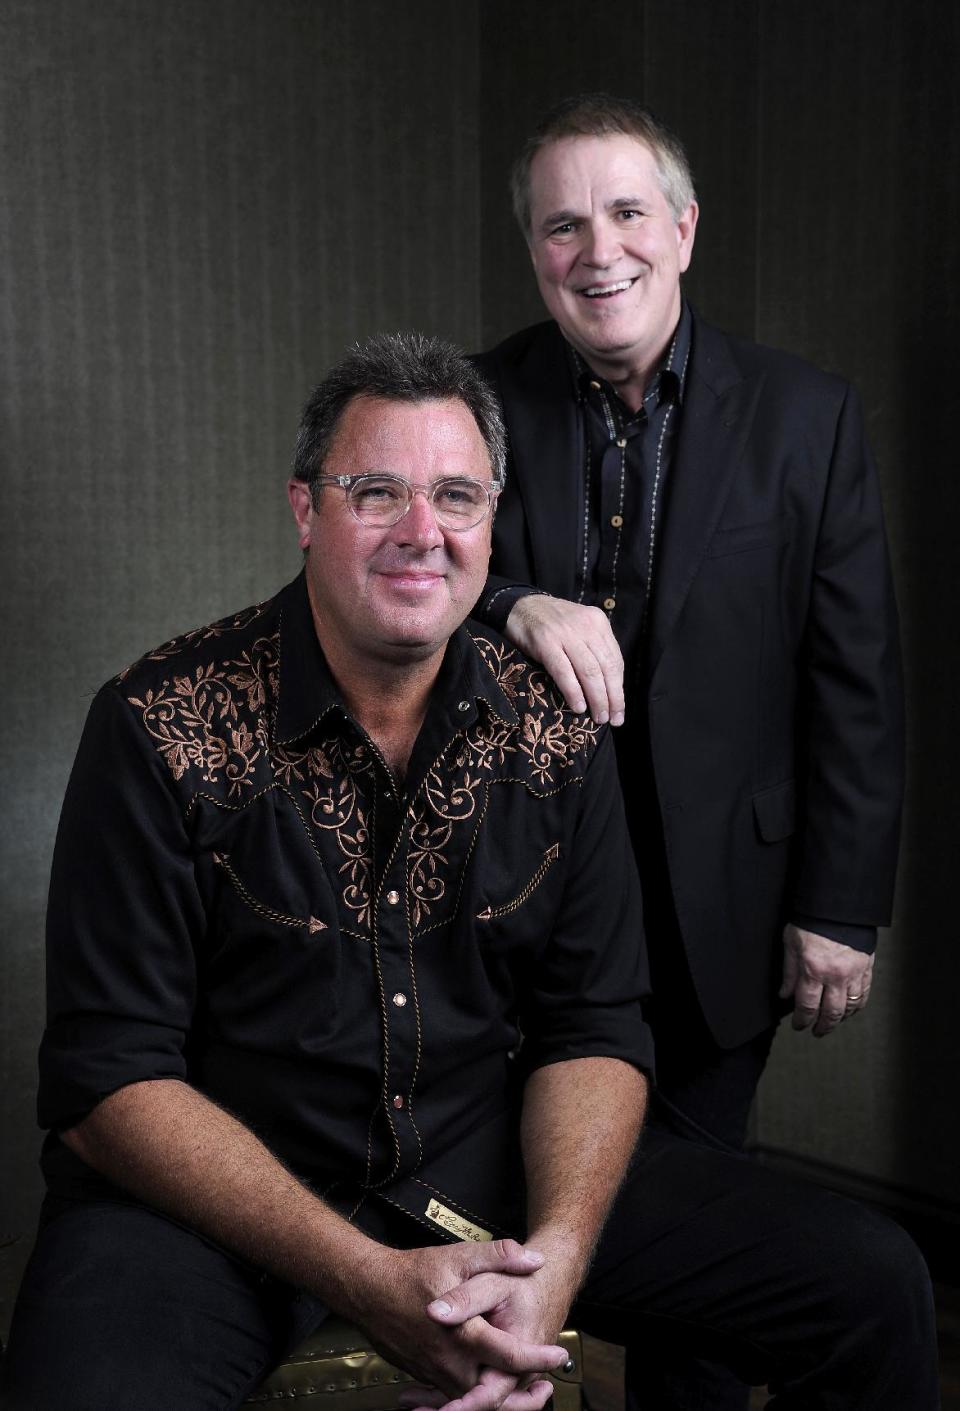 This Saturday, July 27, 2013 photo shows Vince Gill, left, and Paul Franklin posing at the Grand Ole Opry in Nashville, Tenn. Gill and Franklin released their latest album "Bakersfield," on July 30. (Photo by Donn Jones/Invision/AP)